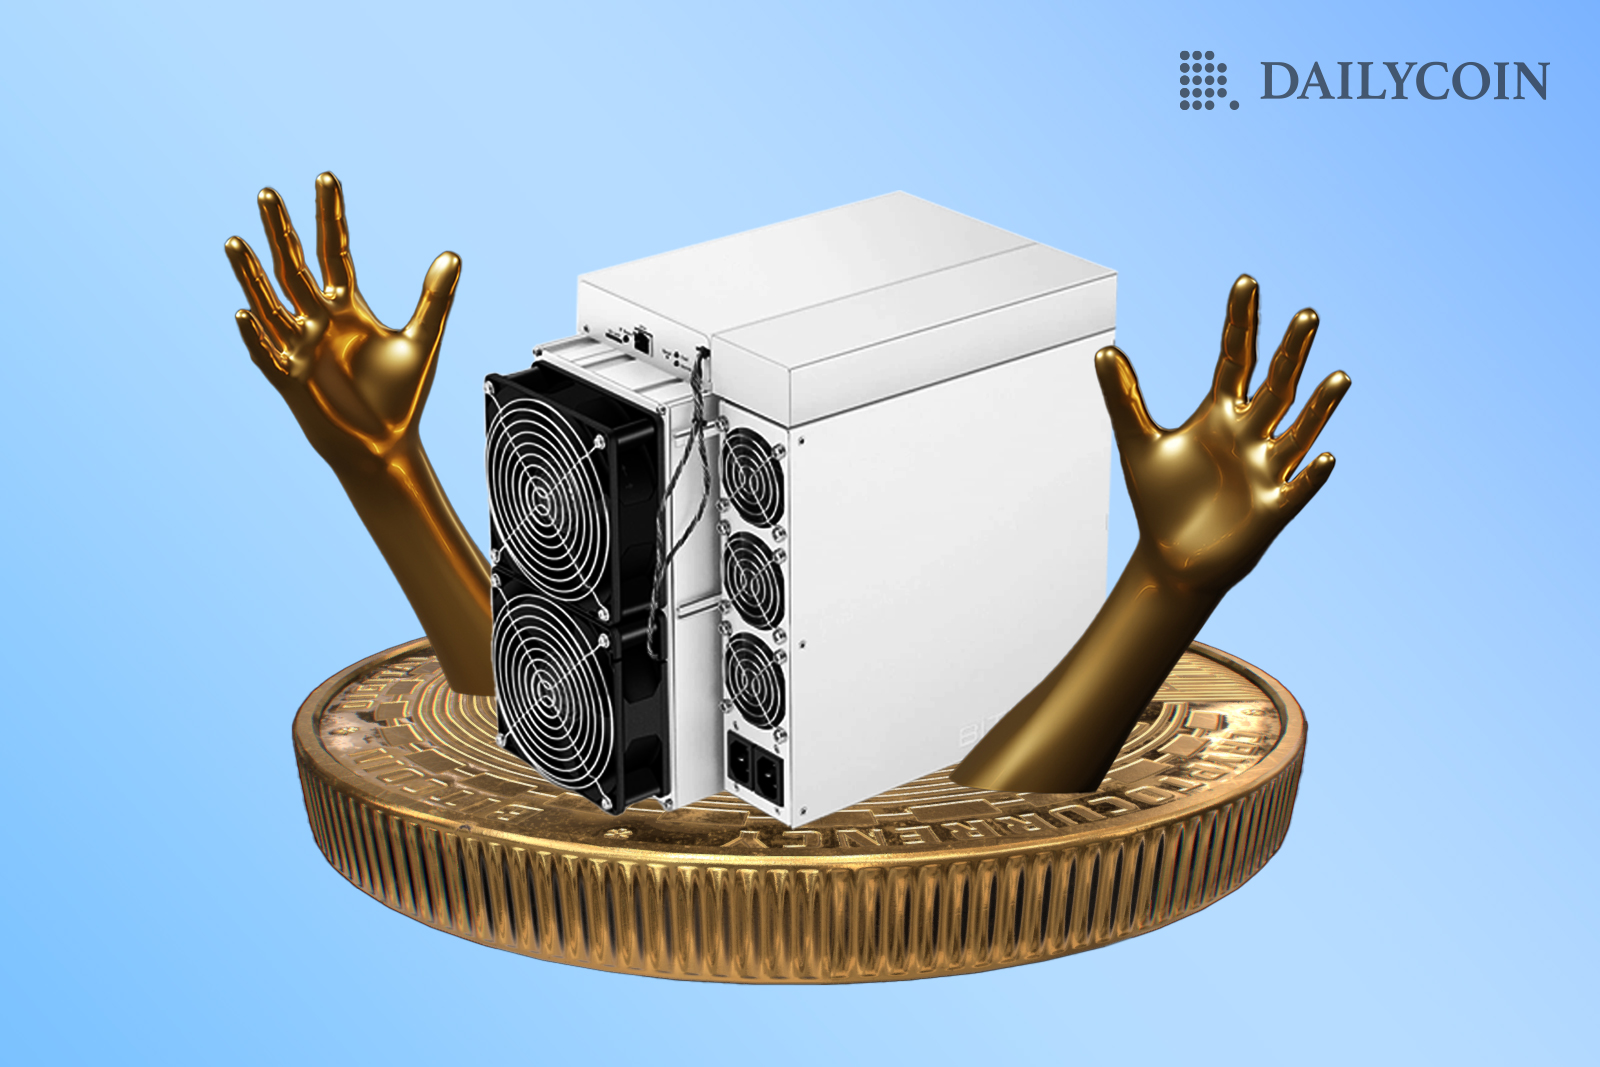 White stationary computer on top of bitcoin coin wit hands reaching out